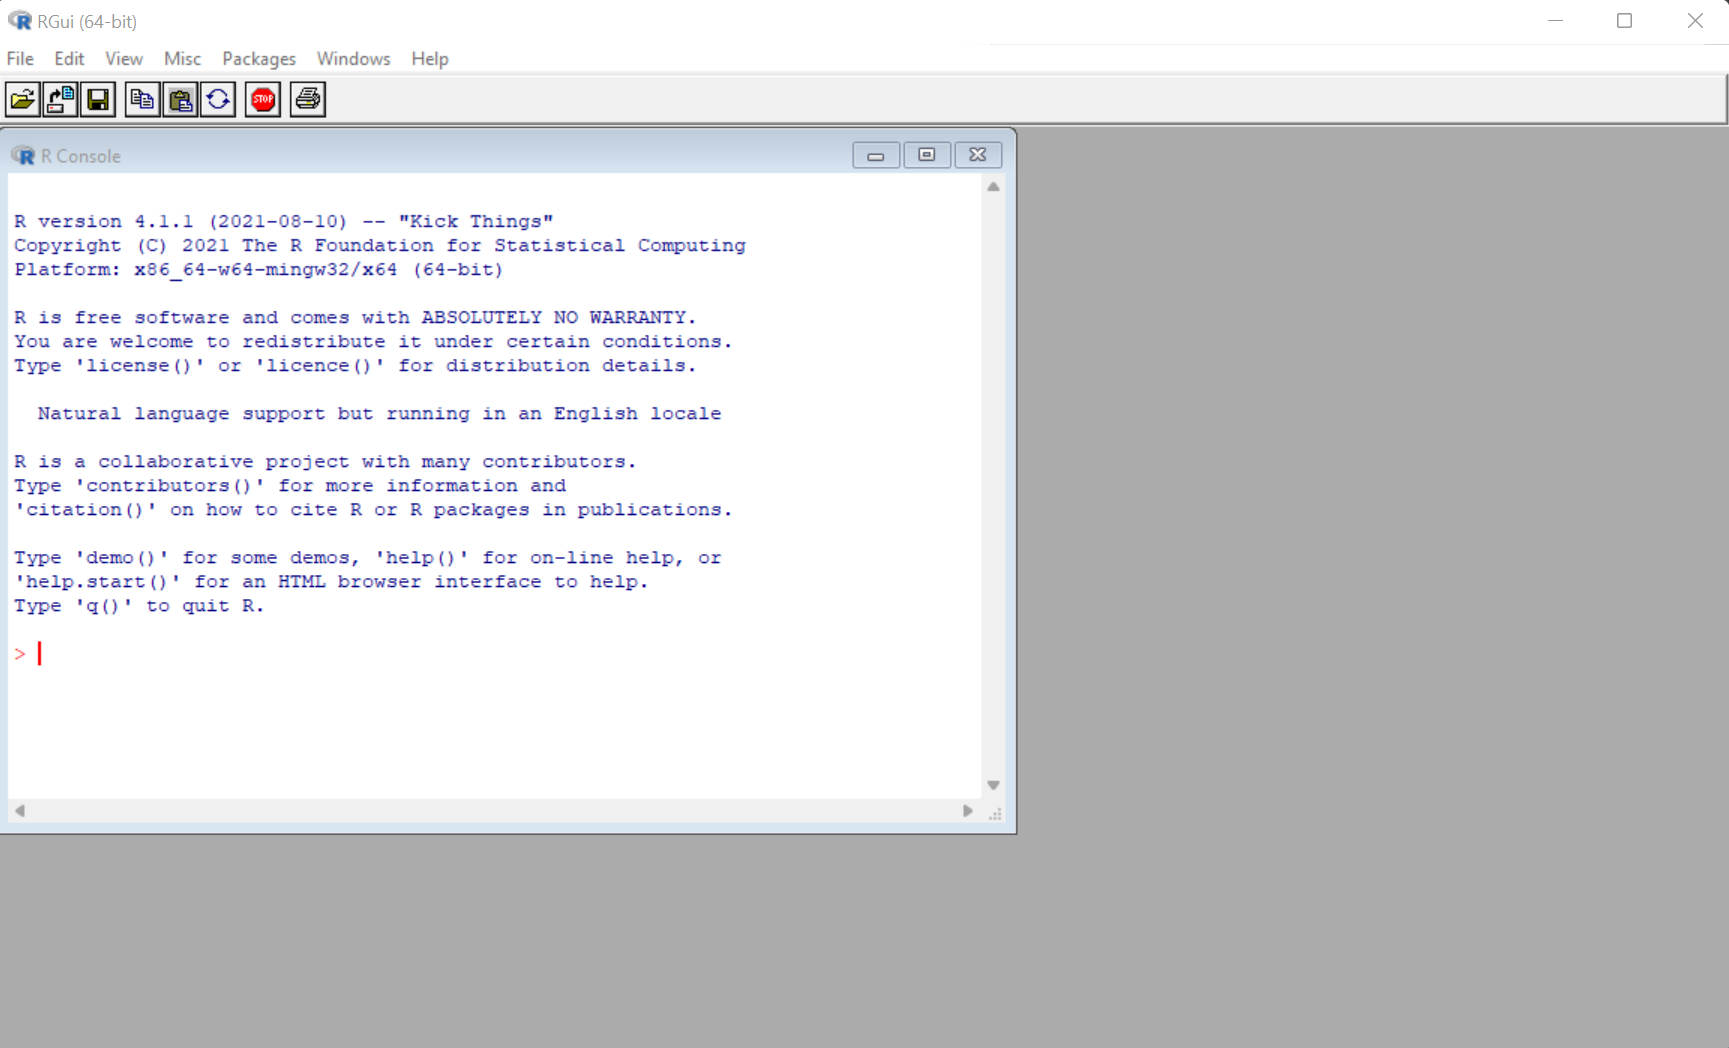 Image of R Program Window with the R Console on Windows OS